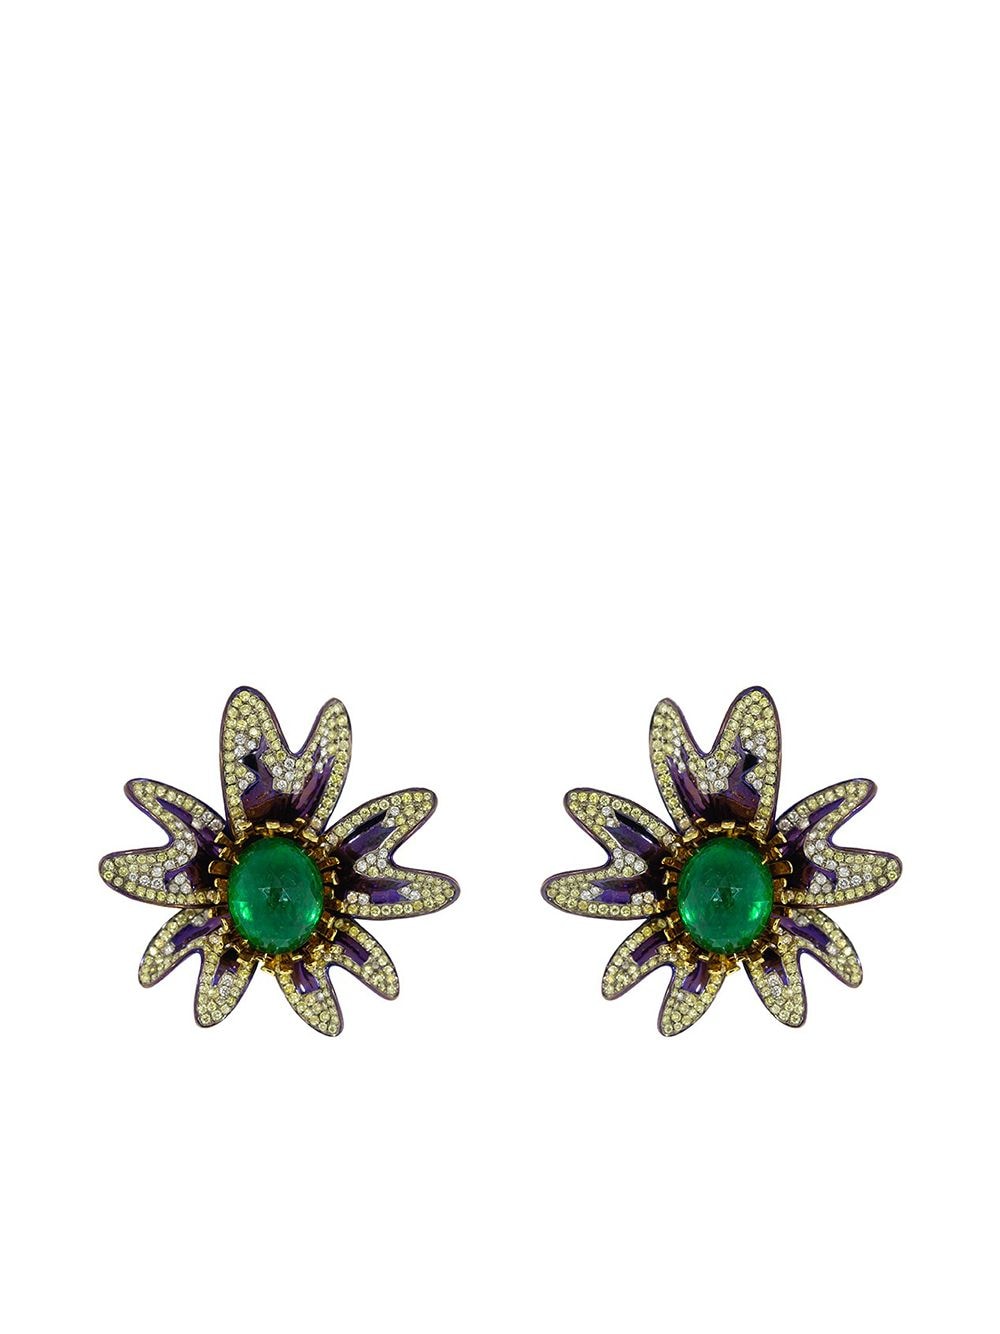 SABOO FINE JEWELS 18KT WHITE GOLD EMERALD AND DIAMOND FLOWER EARRINGS